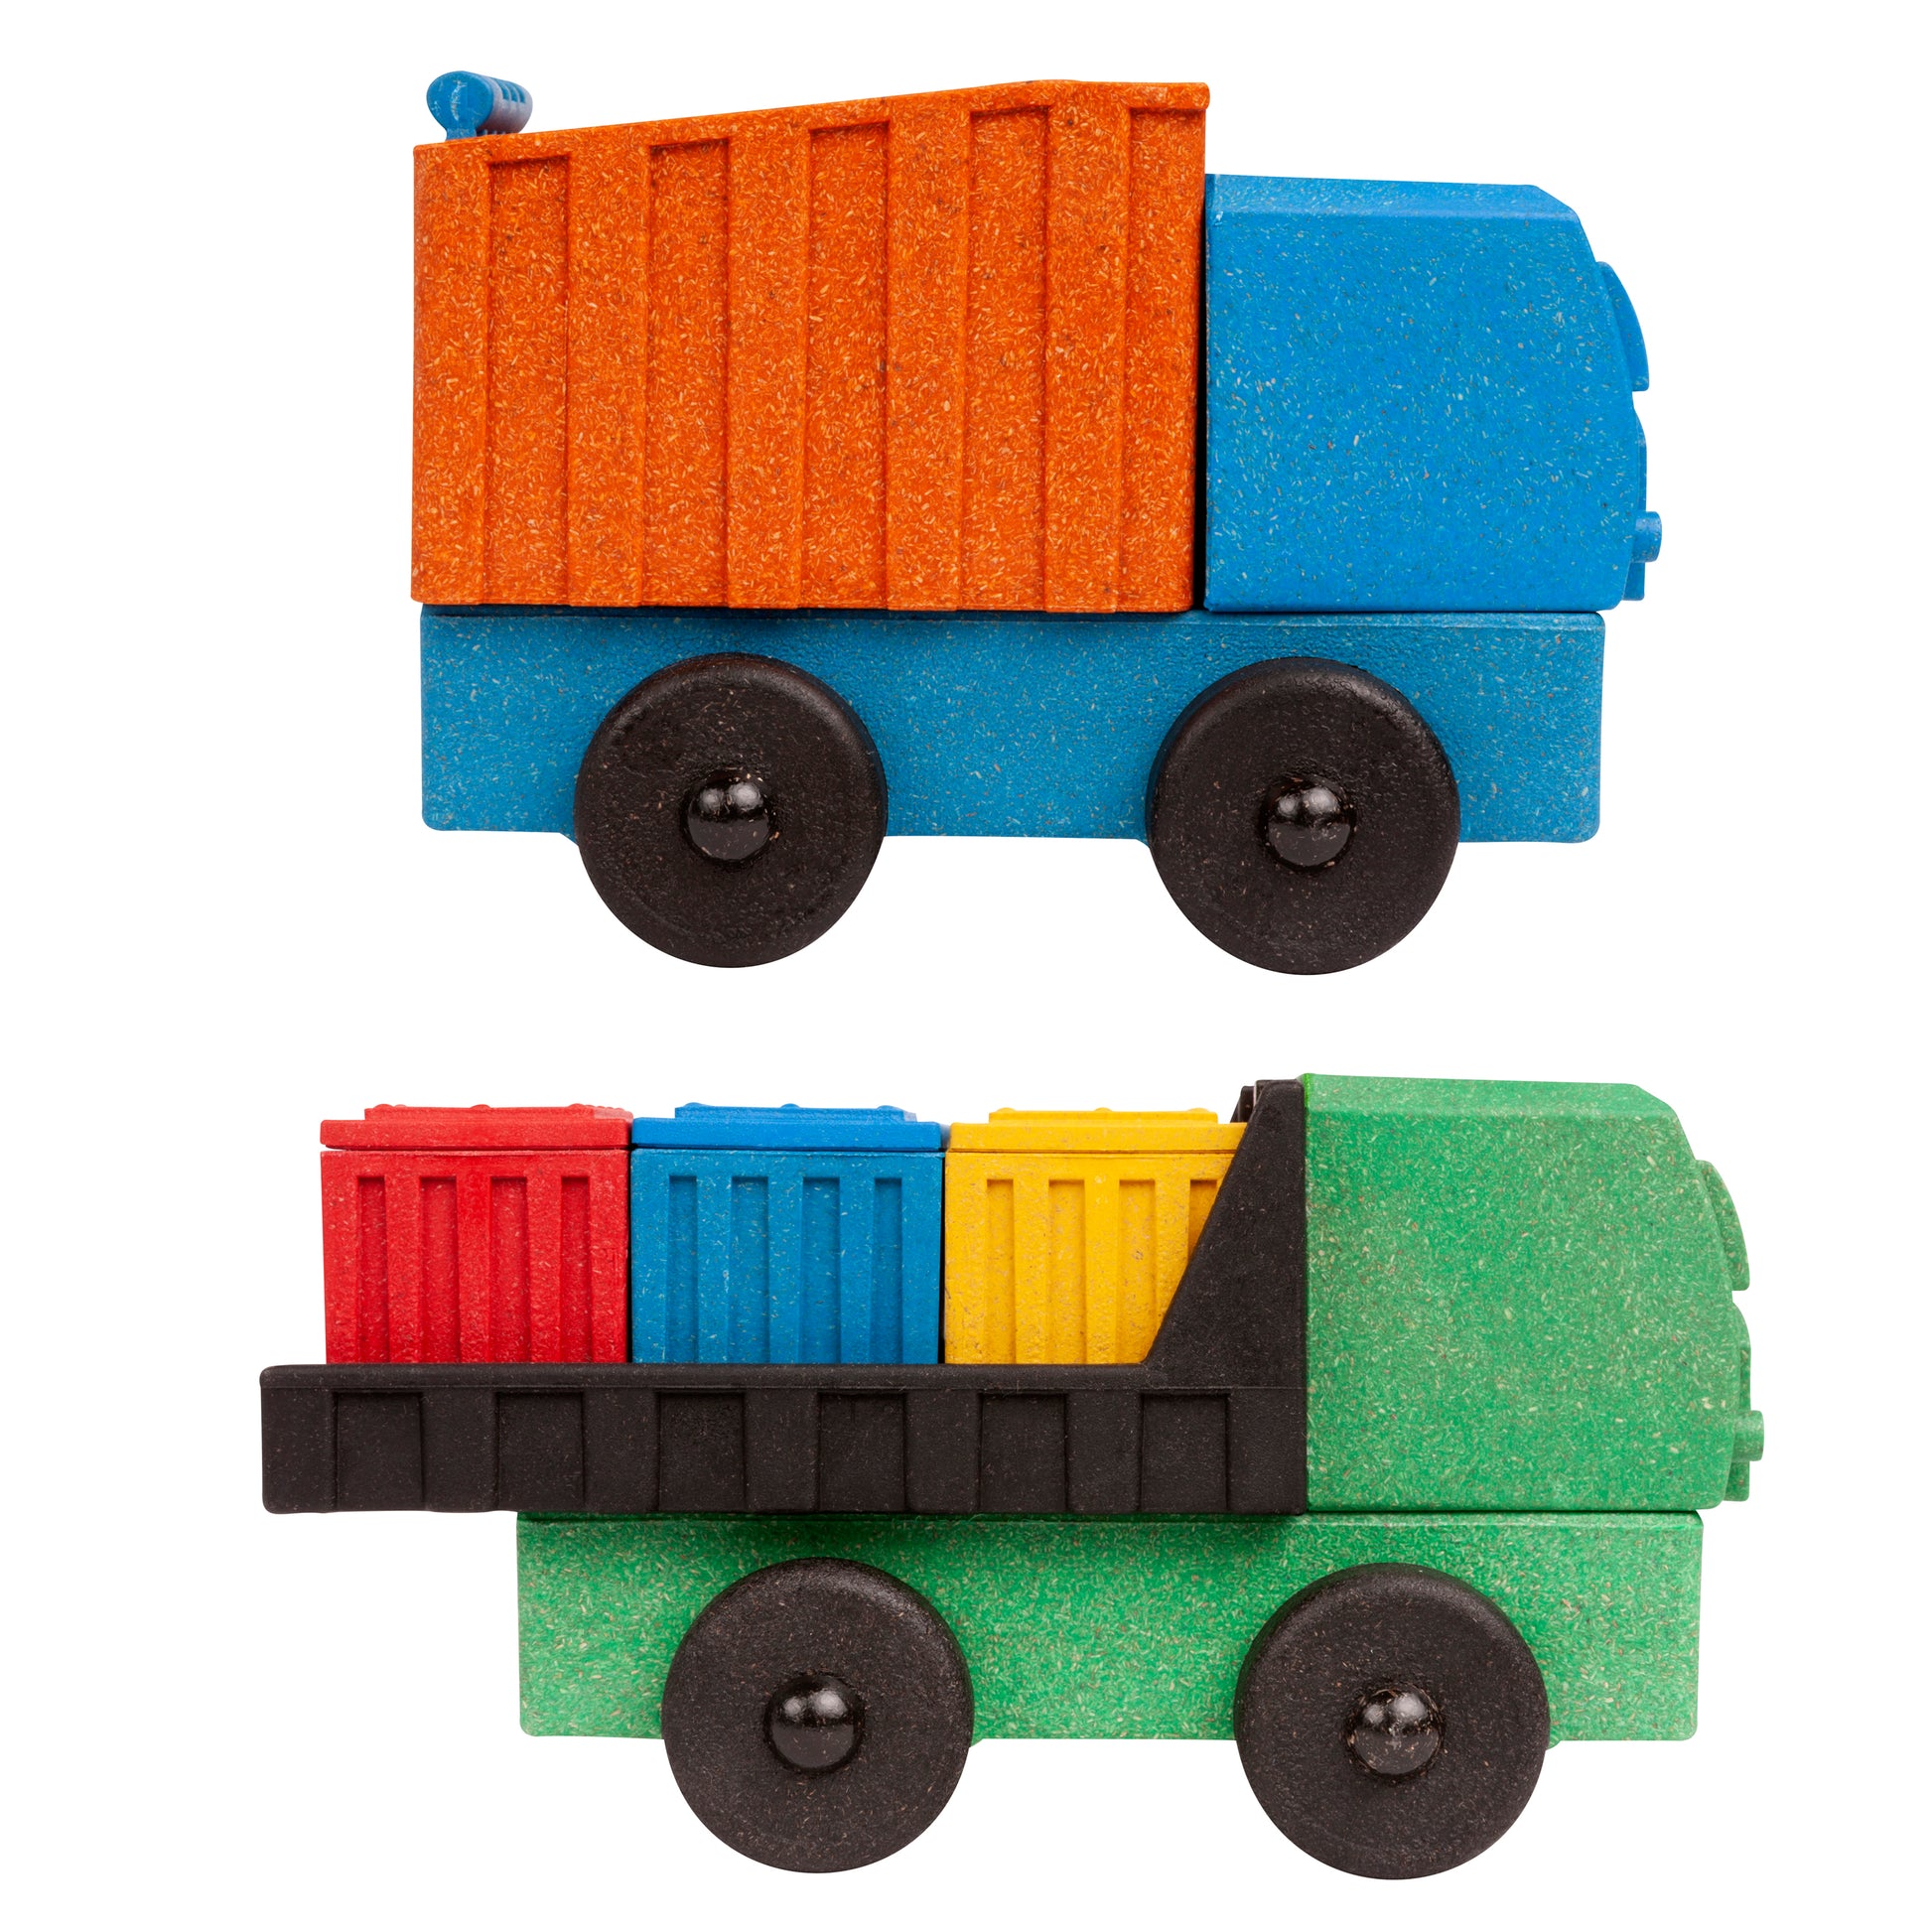 Luke's Toy Factory Cargo Truck Toy and Dump Truck Toy Profile View